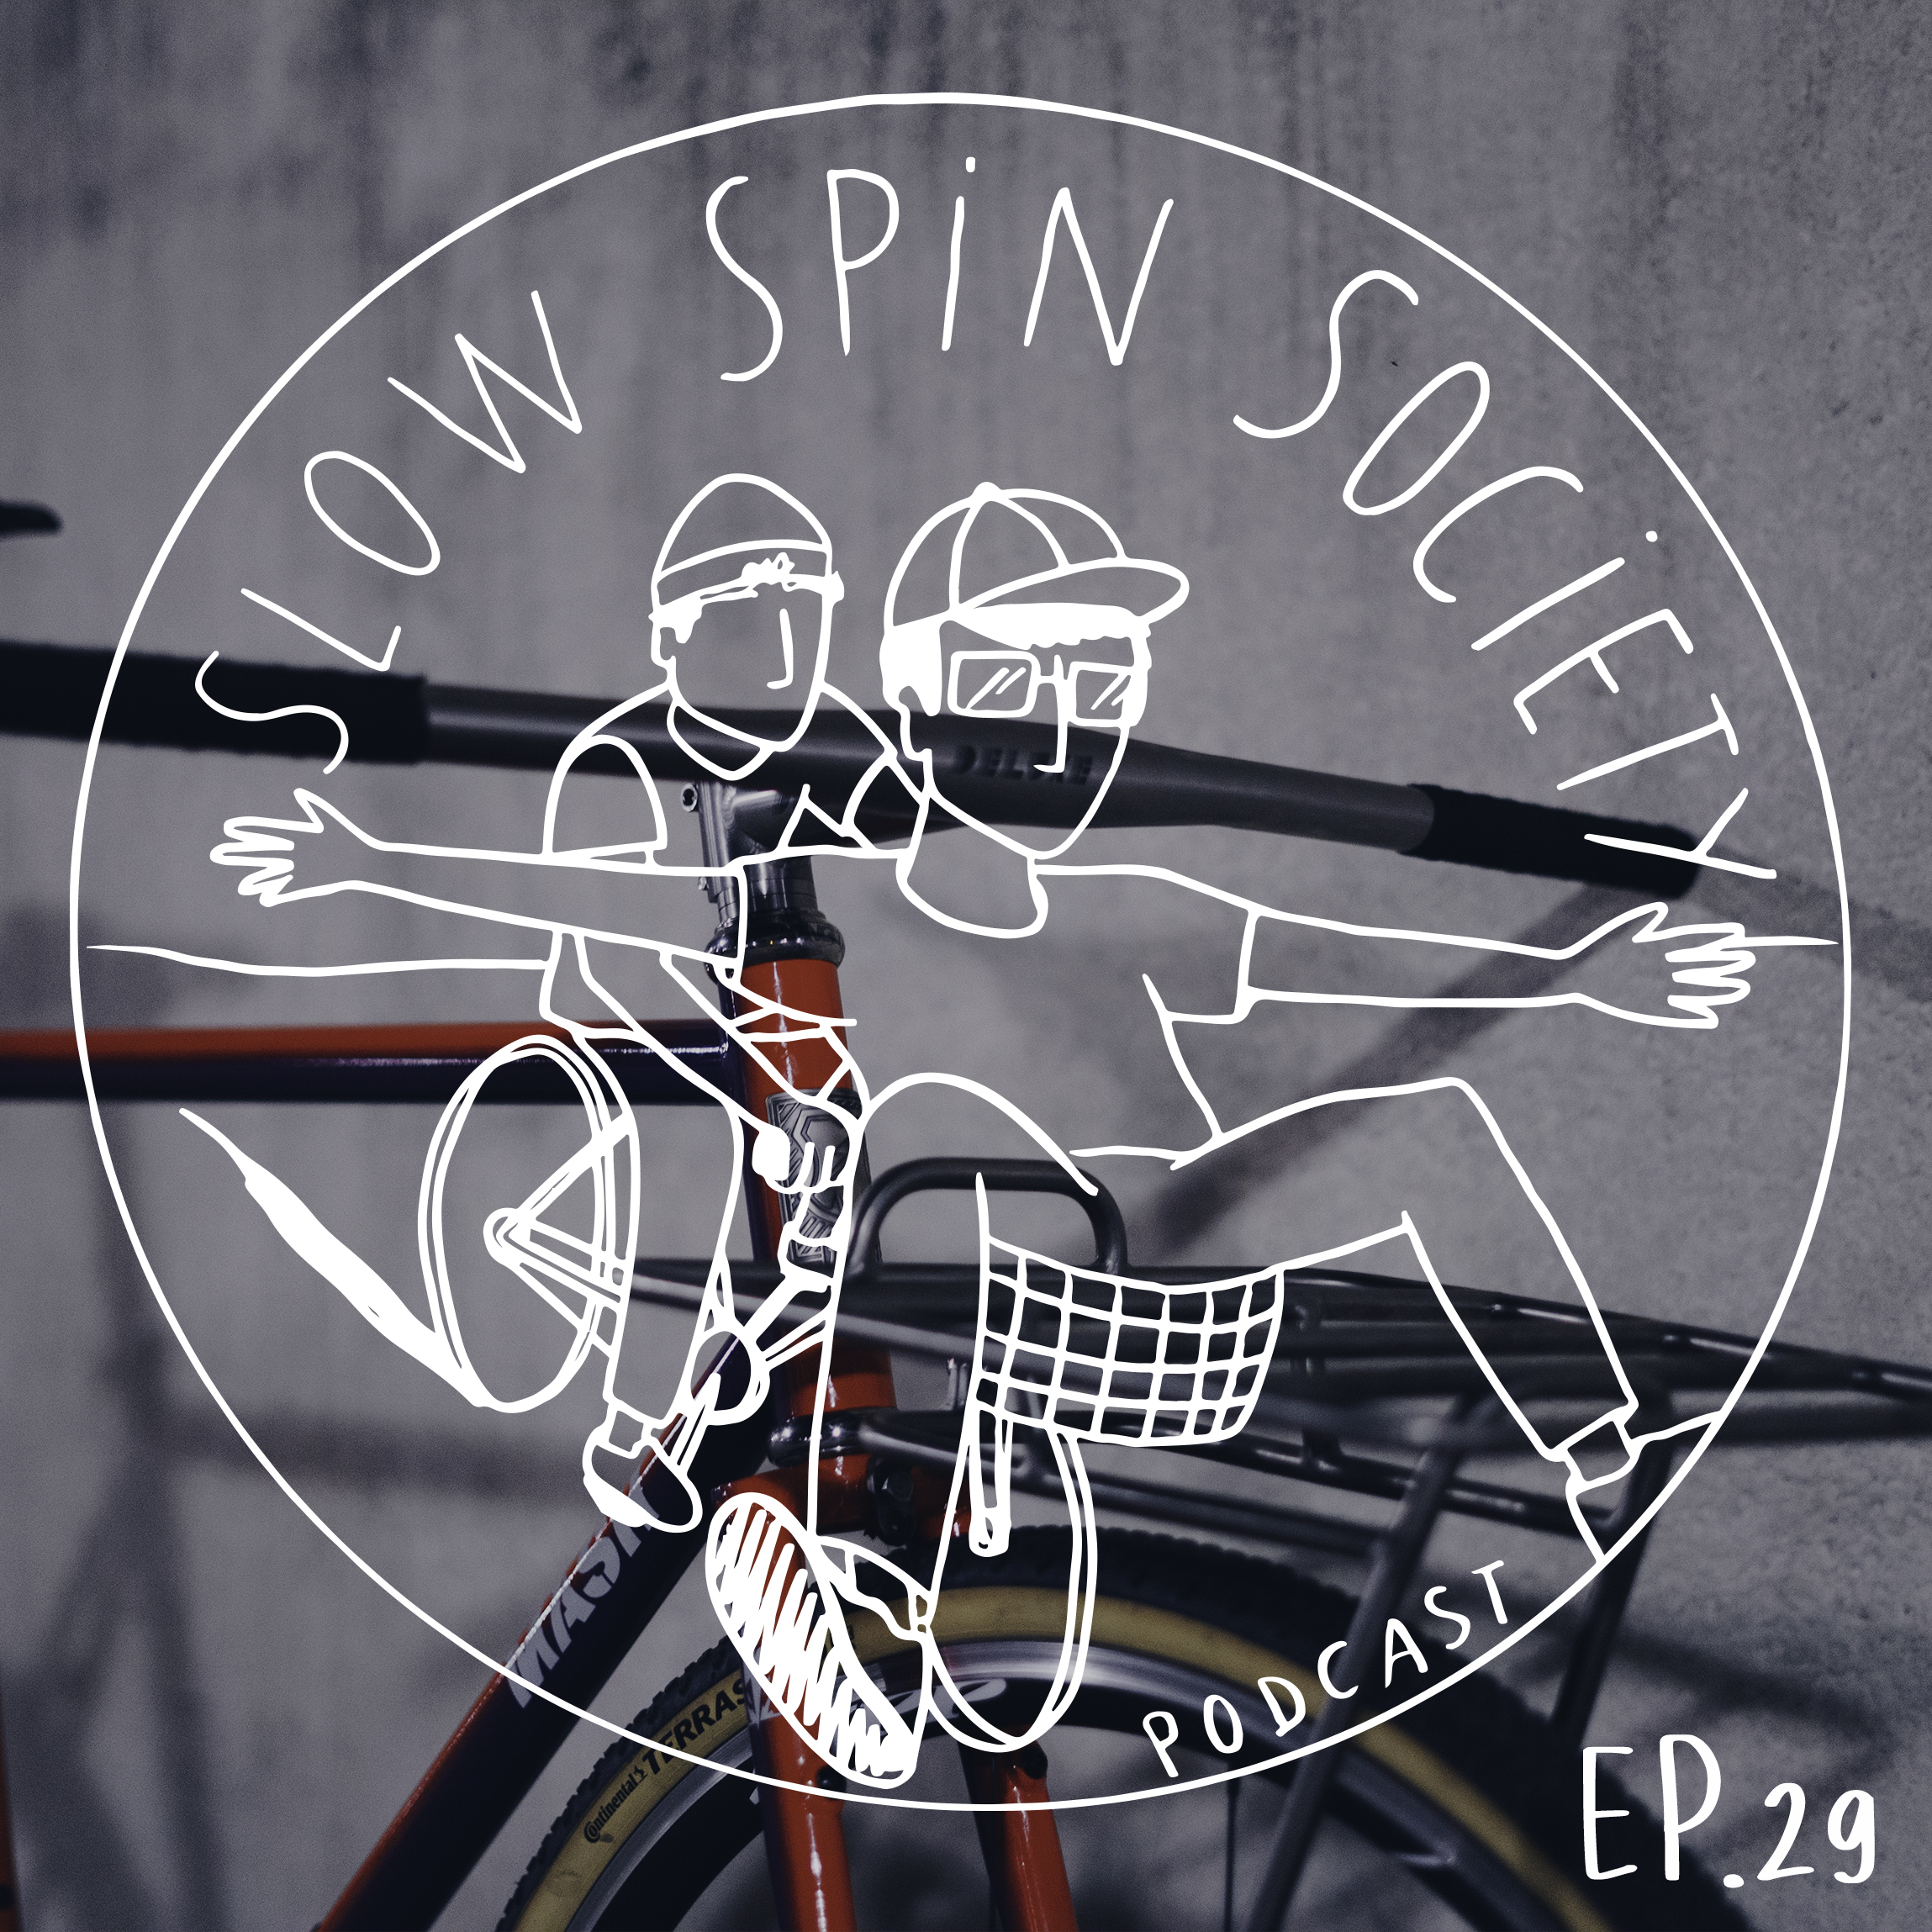 The Slow Spin Society Podcast Ep.29 : Titanium, Mash Frames, Thomson: Are they worth it?